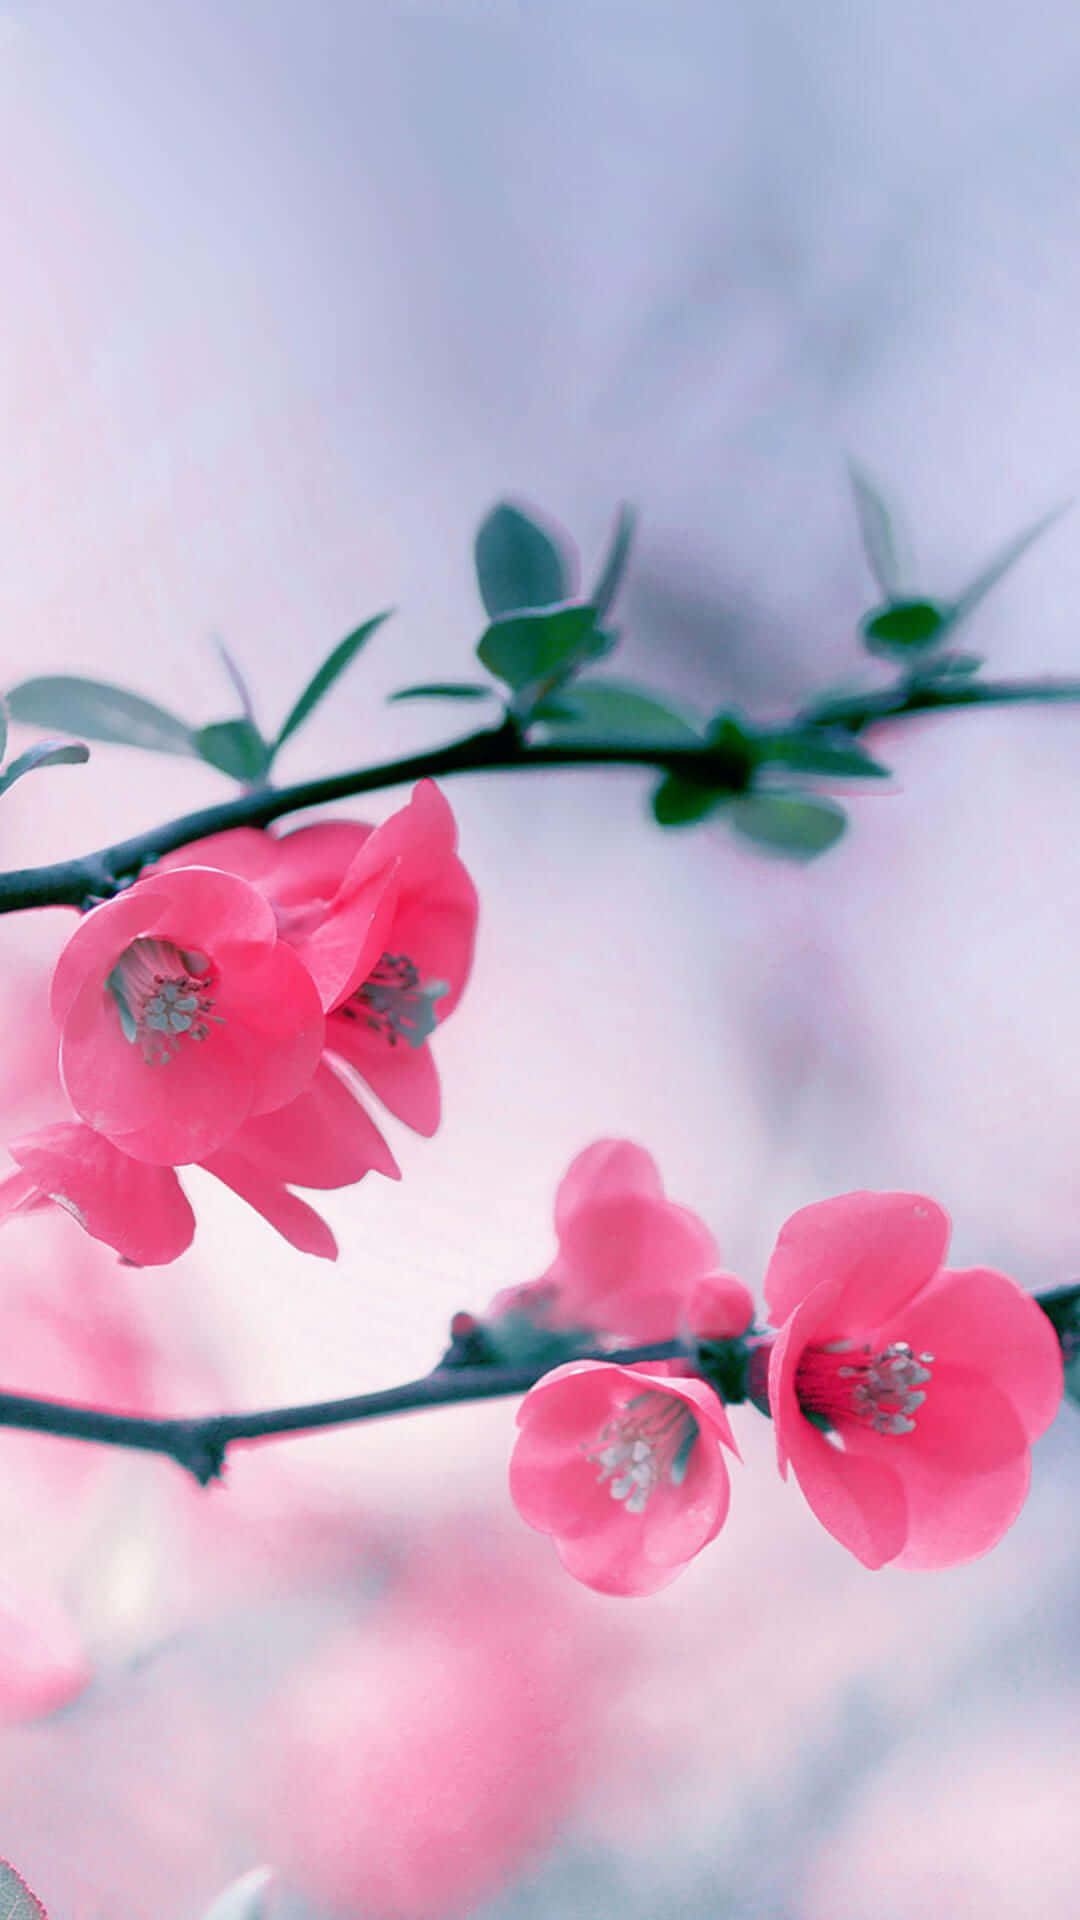 Caption: Spring Blooms On Iphone Display Wallpaper